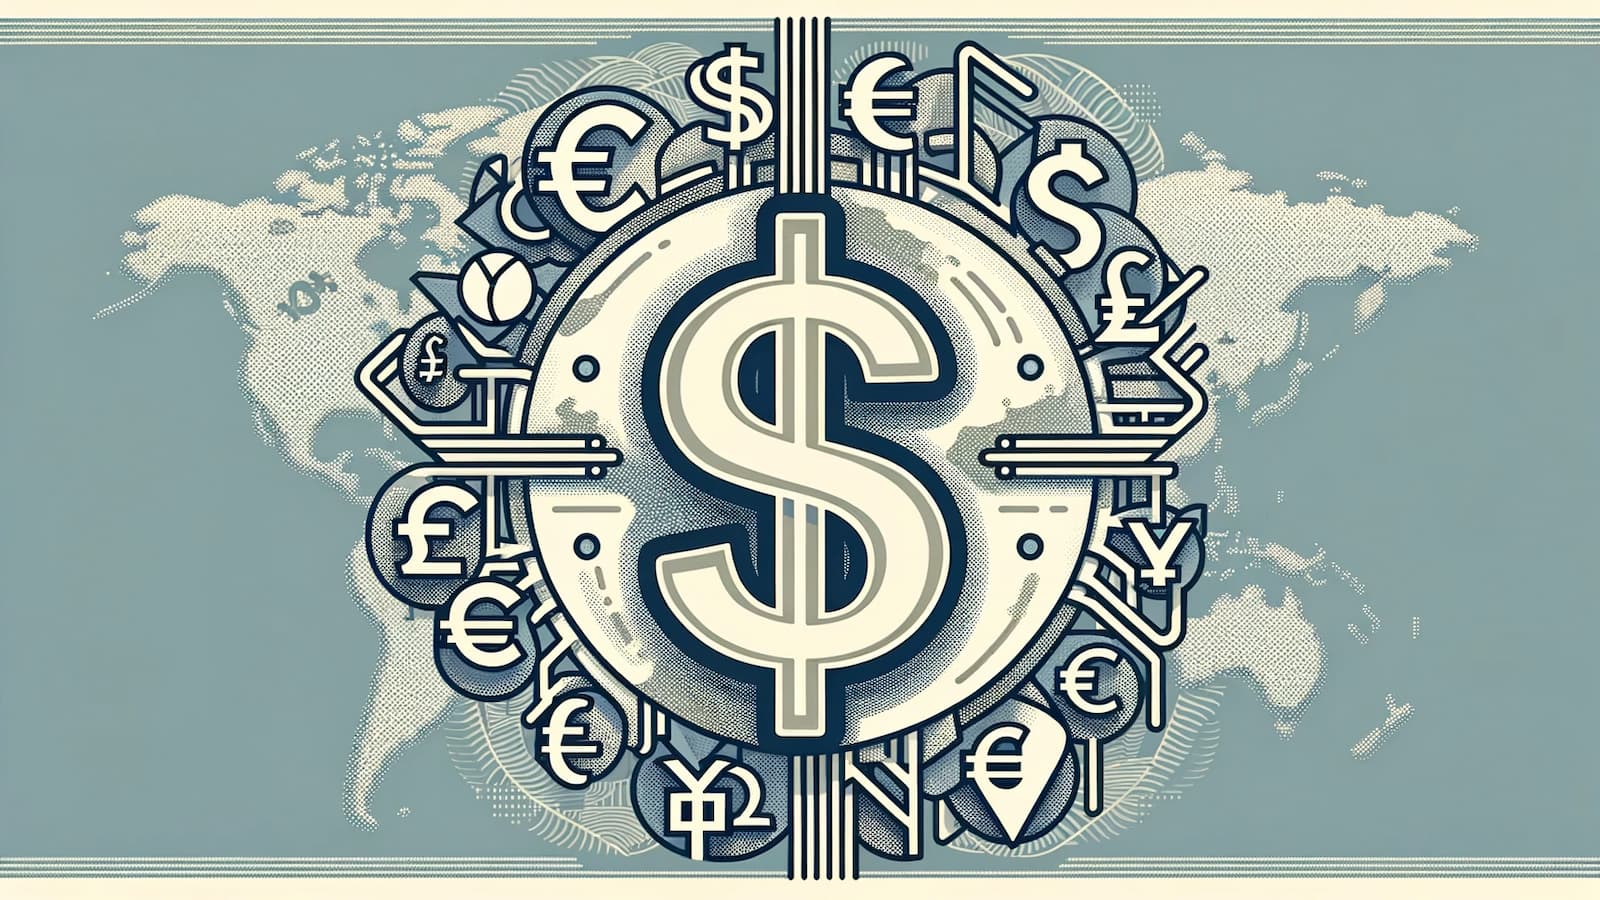 Stability of the U.S. Dollar as the Global Reserve Currency Amid Geopolitical Tensions